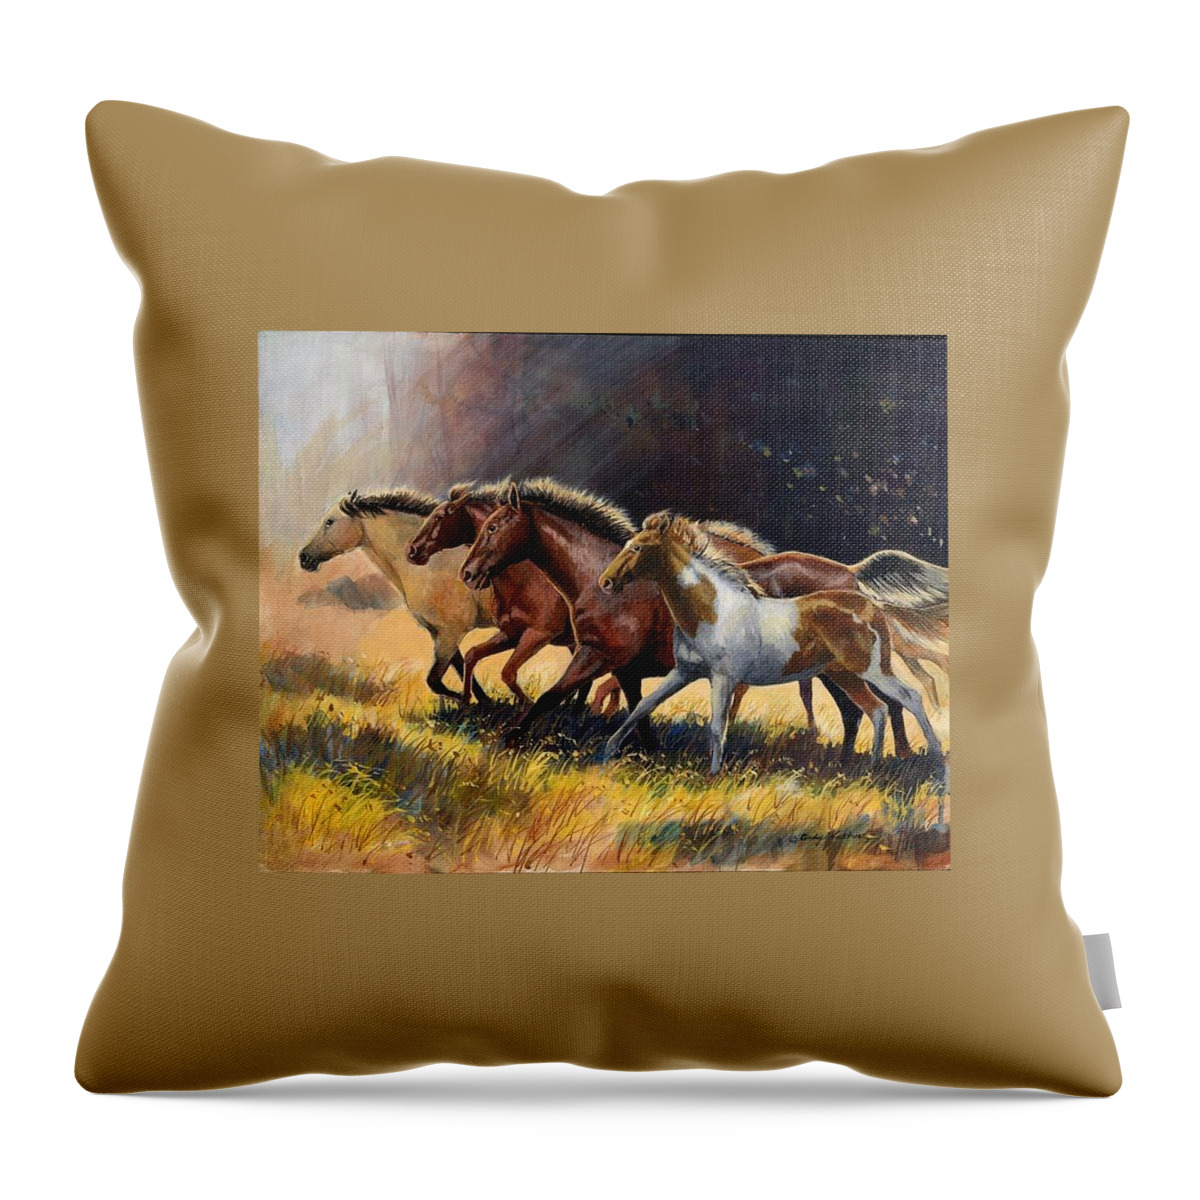 Artwork Throw Pillow featuring the painting Early Morning Run by Cynthia Westbrook